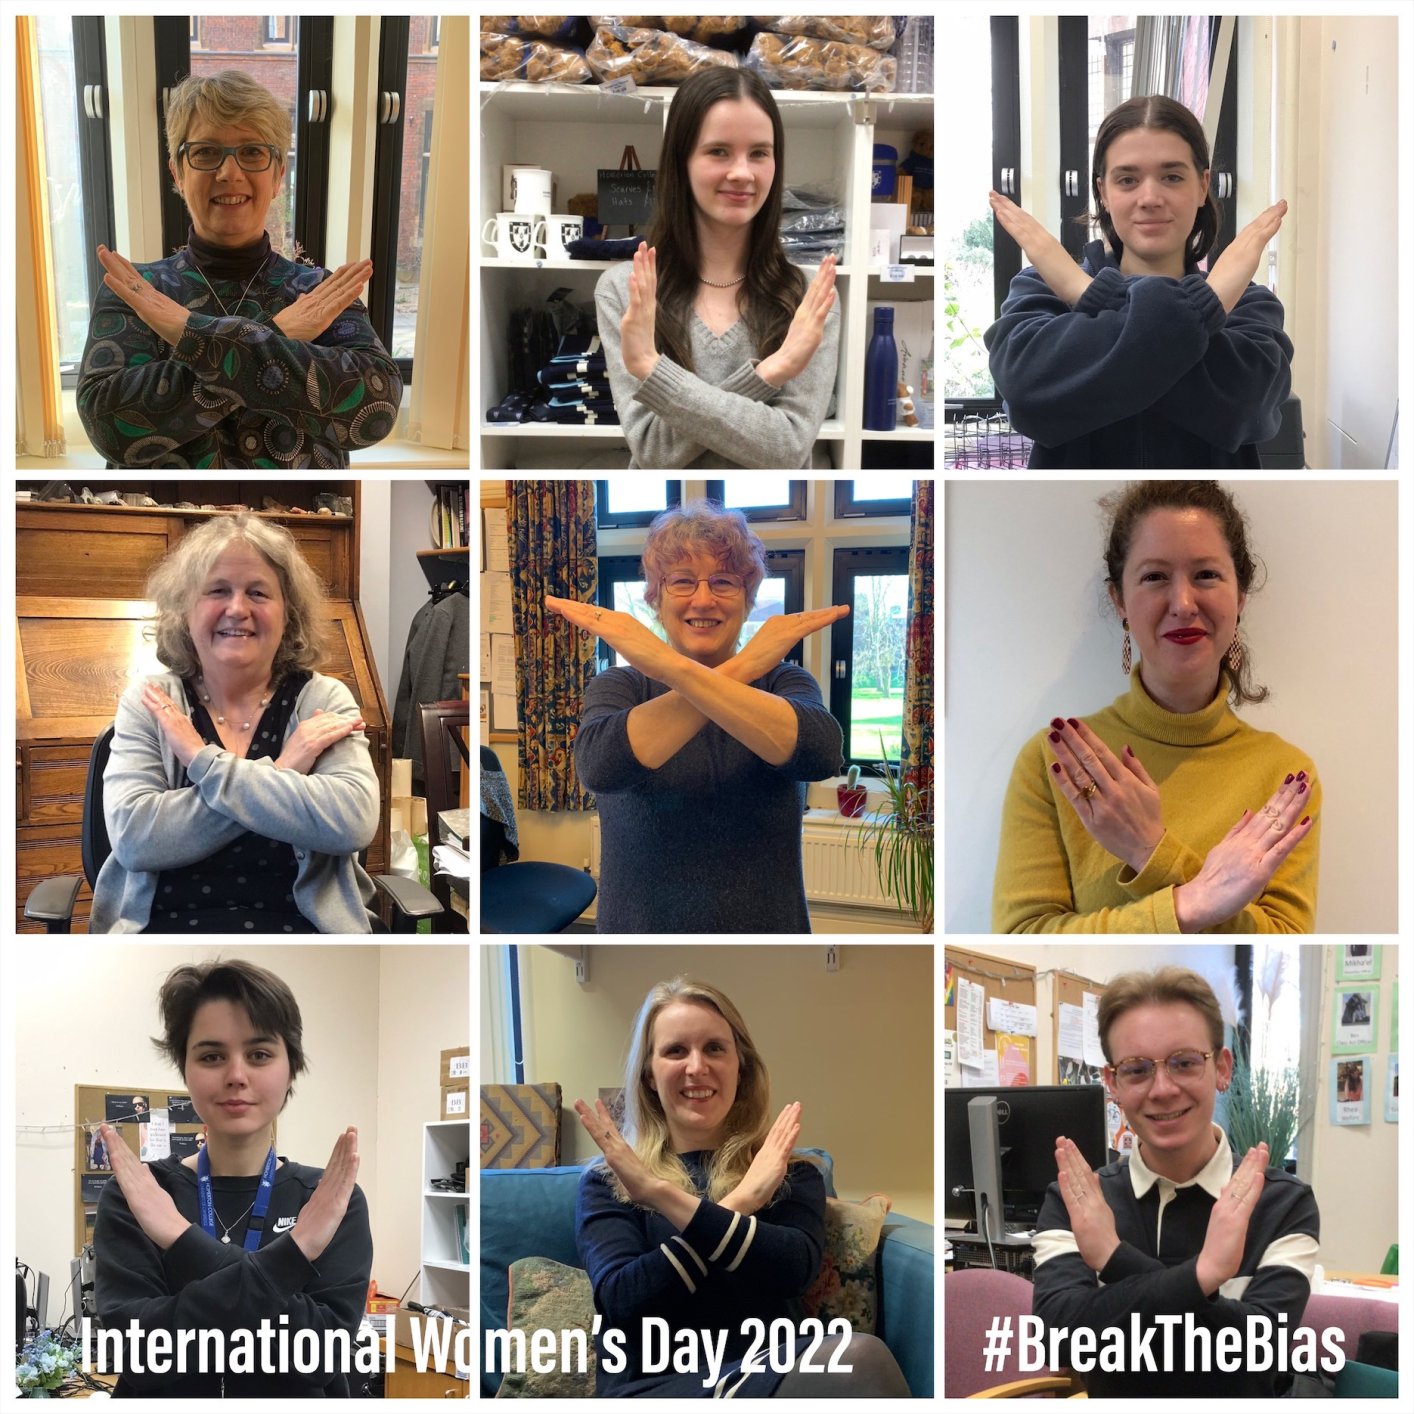 Students, staff and Fellows cross their arms in solidarity with International Women's Day's 'Break the Bias' message